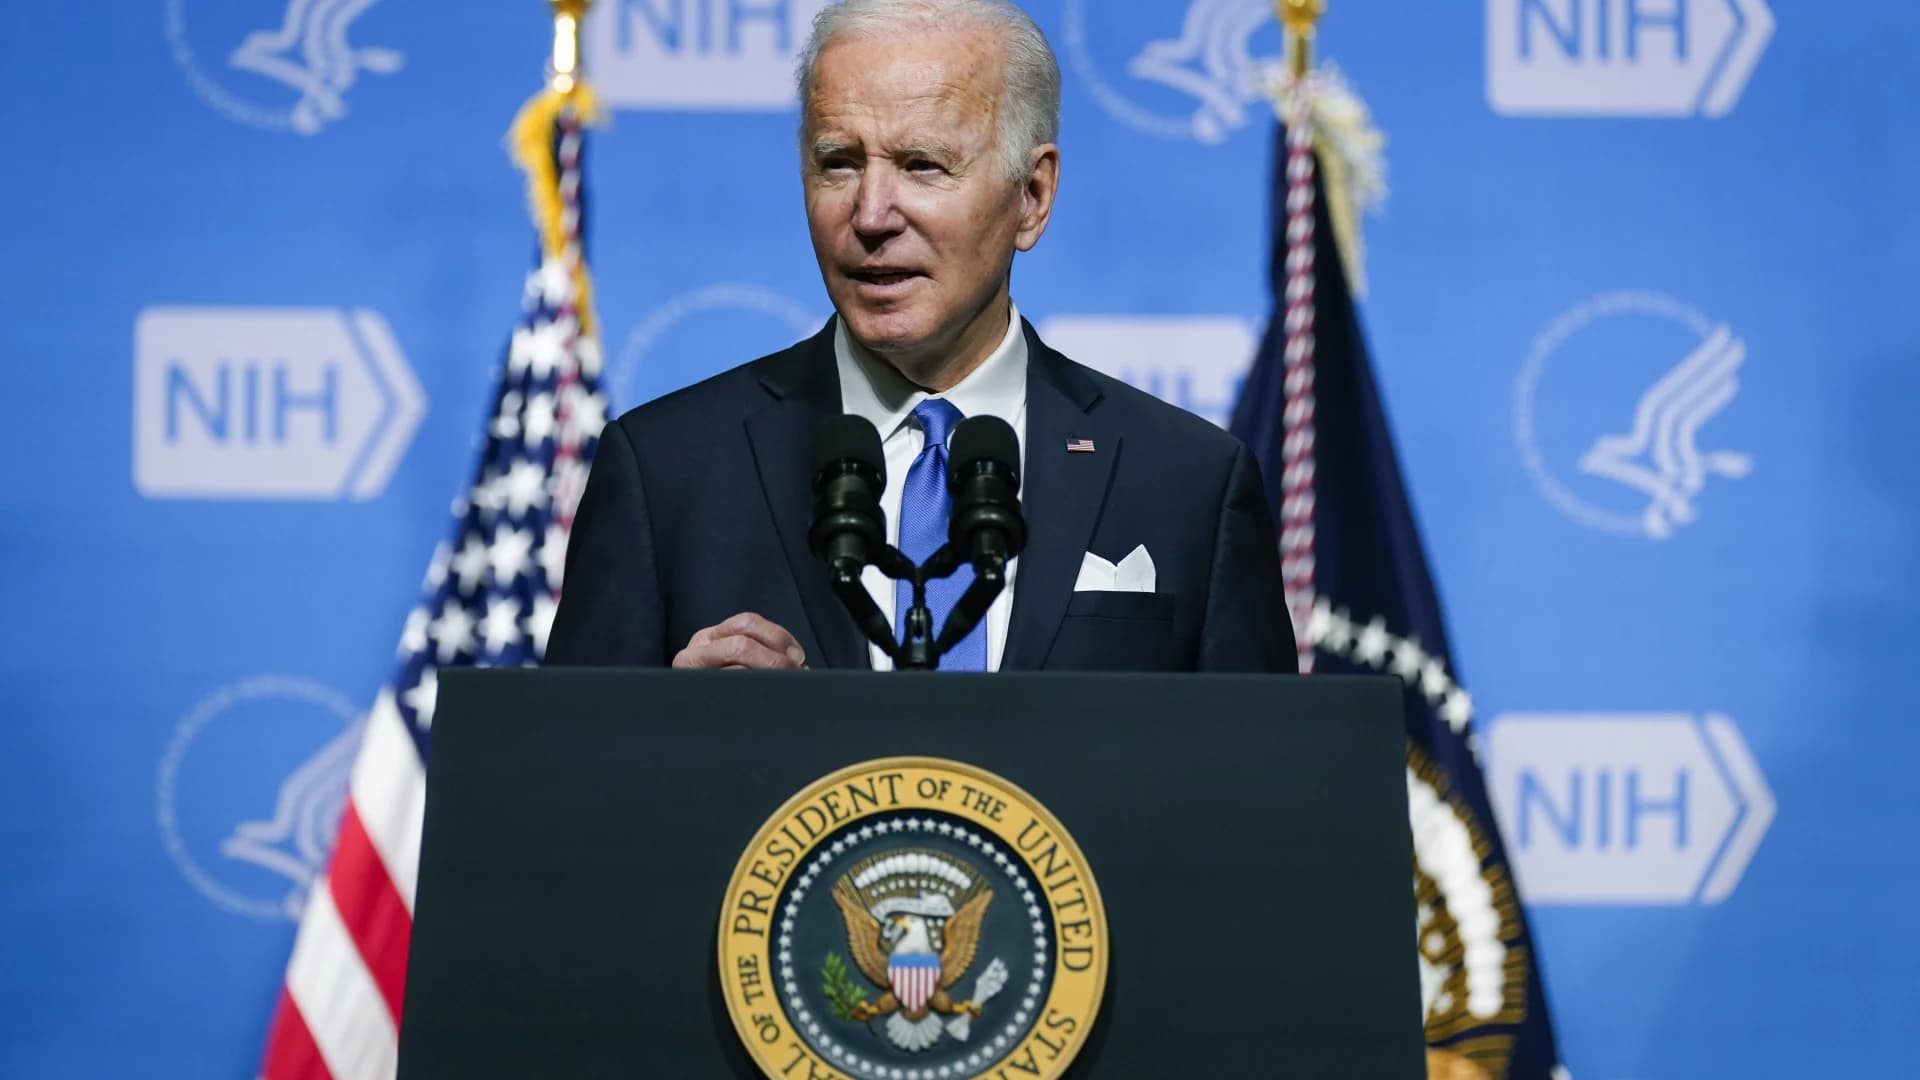 Biden says 'we need to be ready' as he pushes winter COVID-19 plan